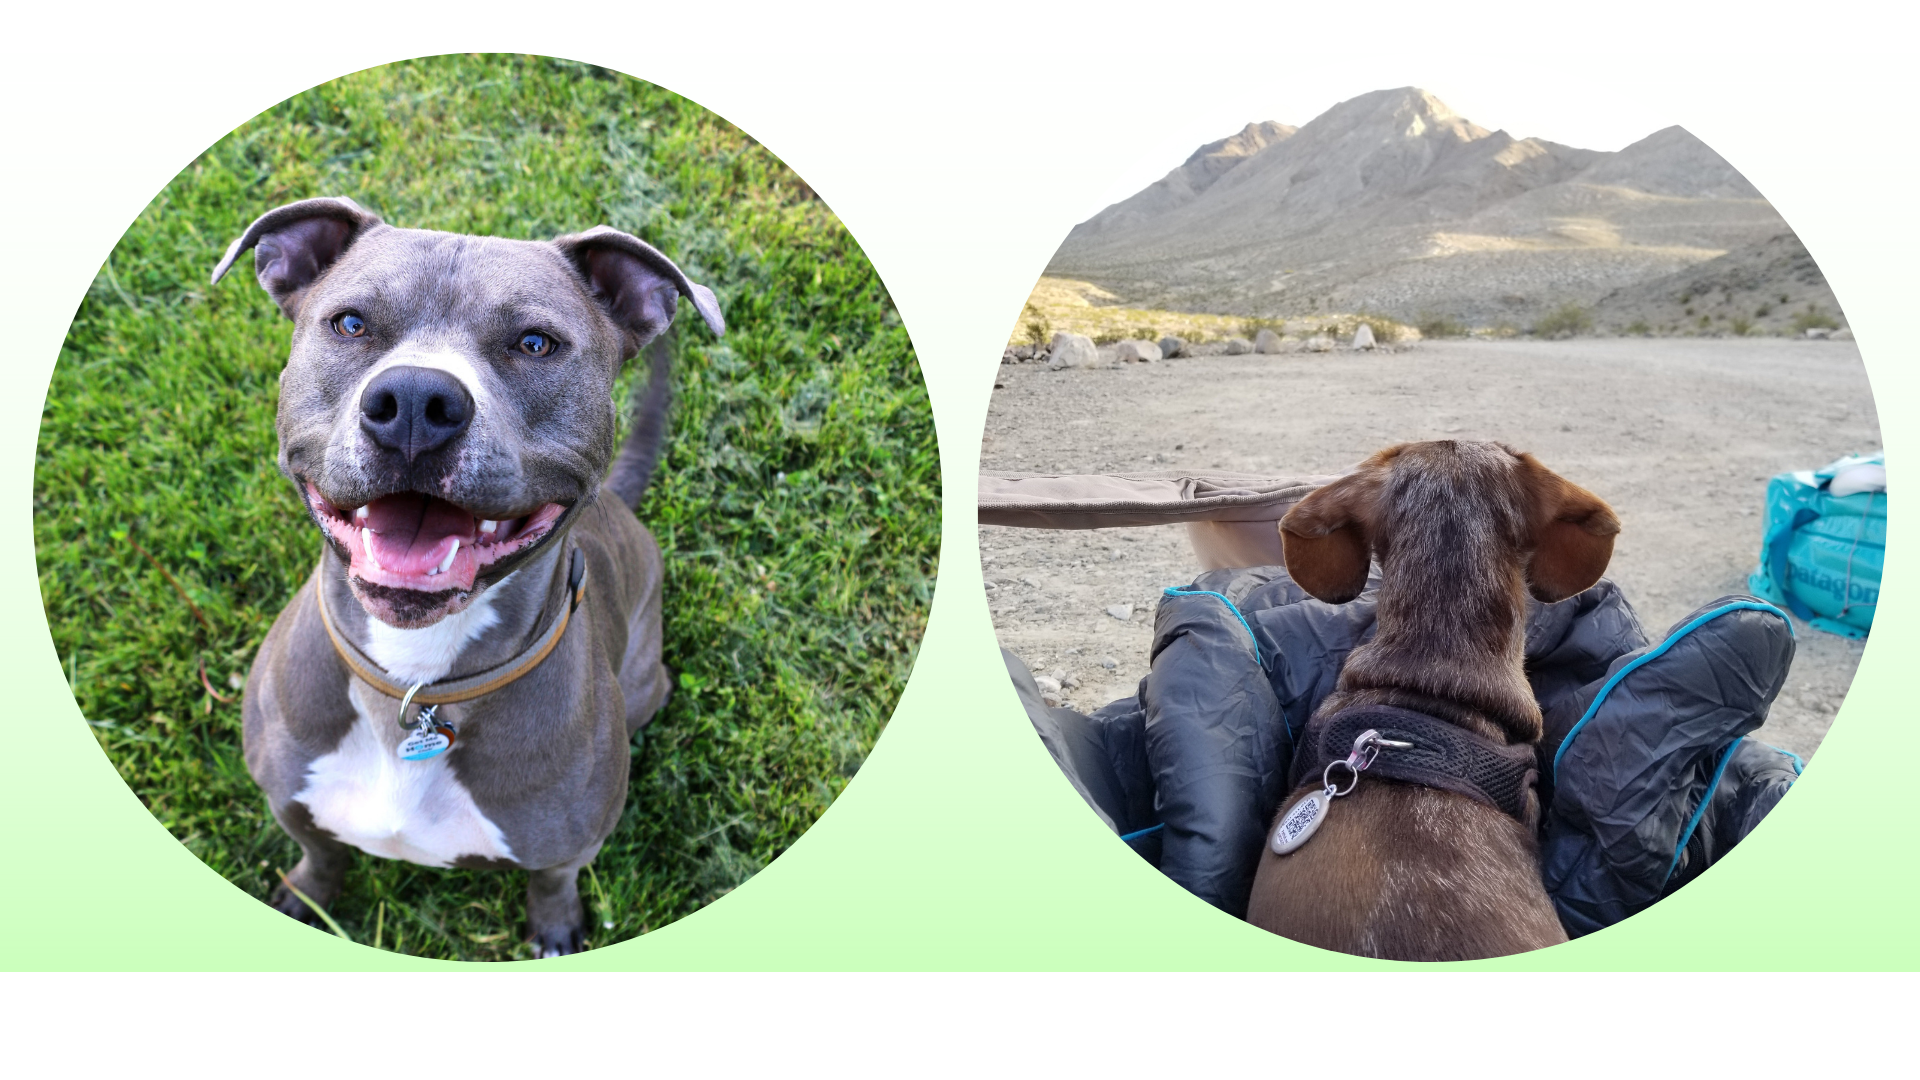 Pitbull and Doxie in PetHub ID Tags